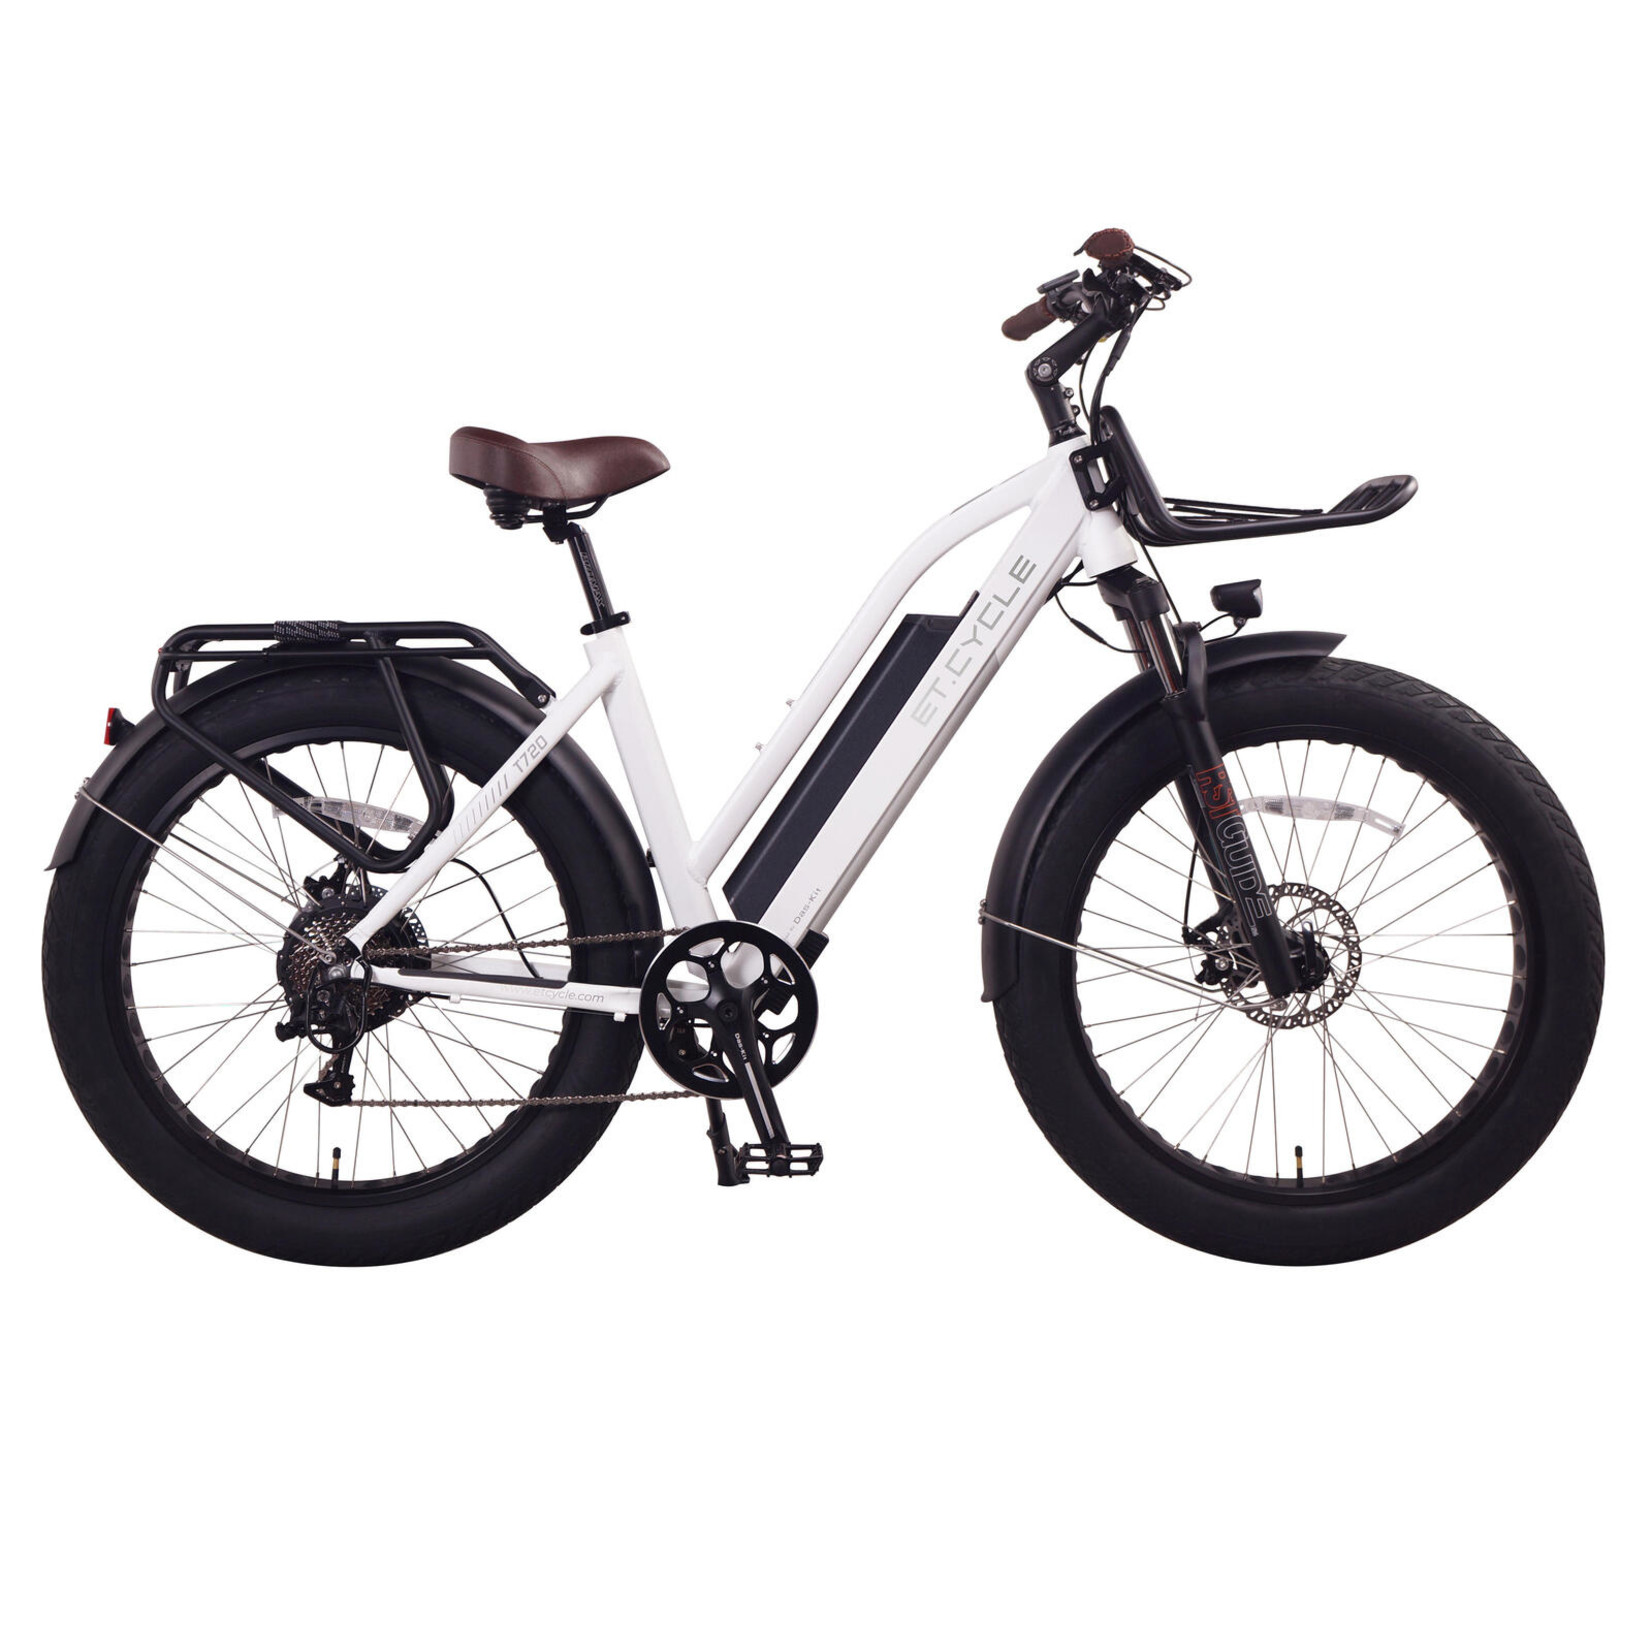 Leon Cycle ET. Cycle T720 Electric Fat Tire Bike